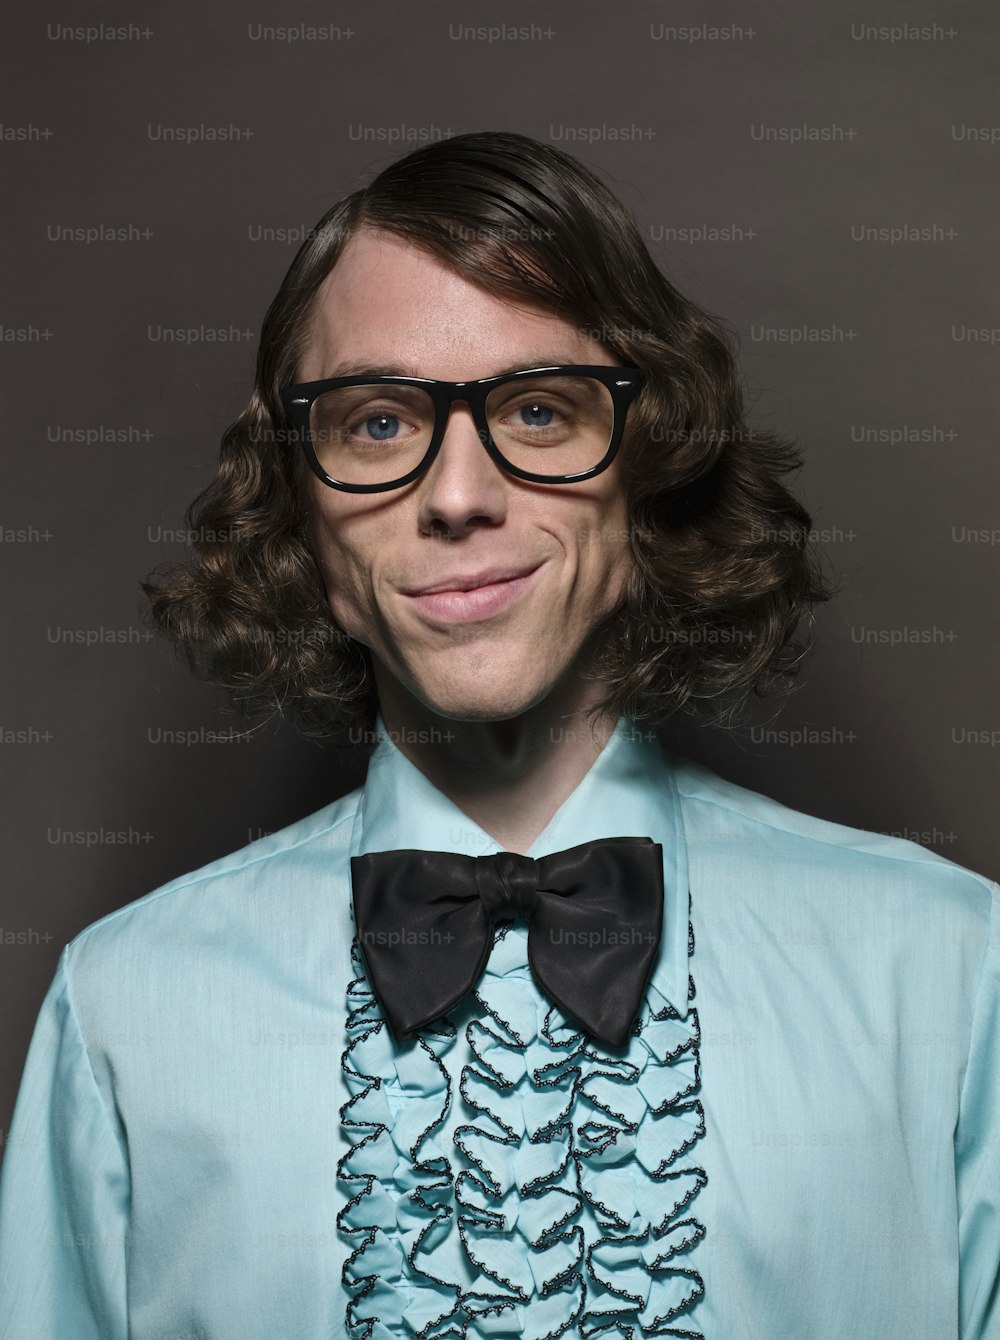 a man wearing a blue shirt and black bow tie